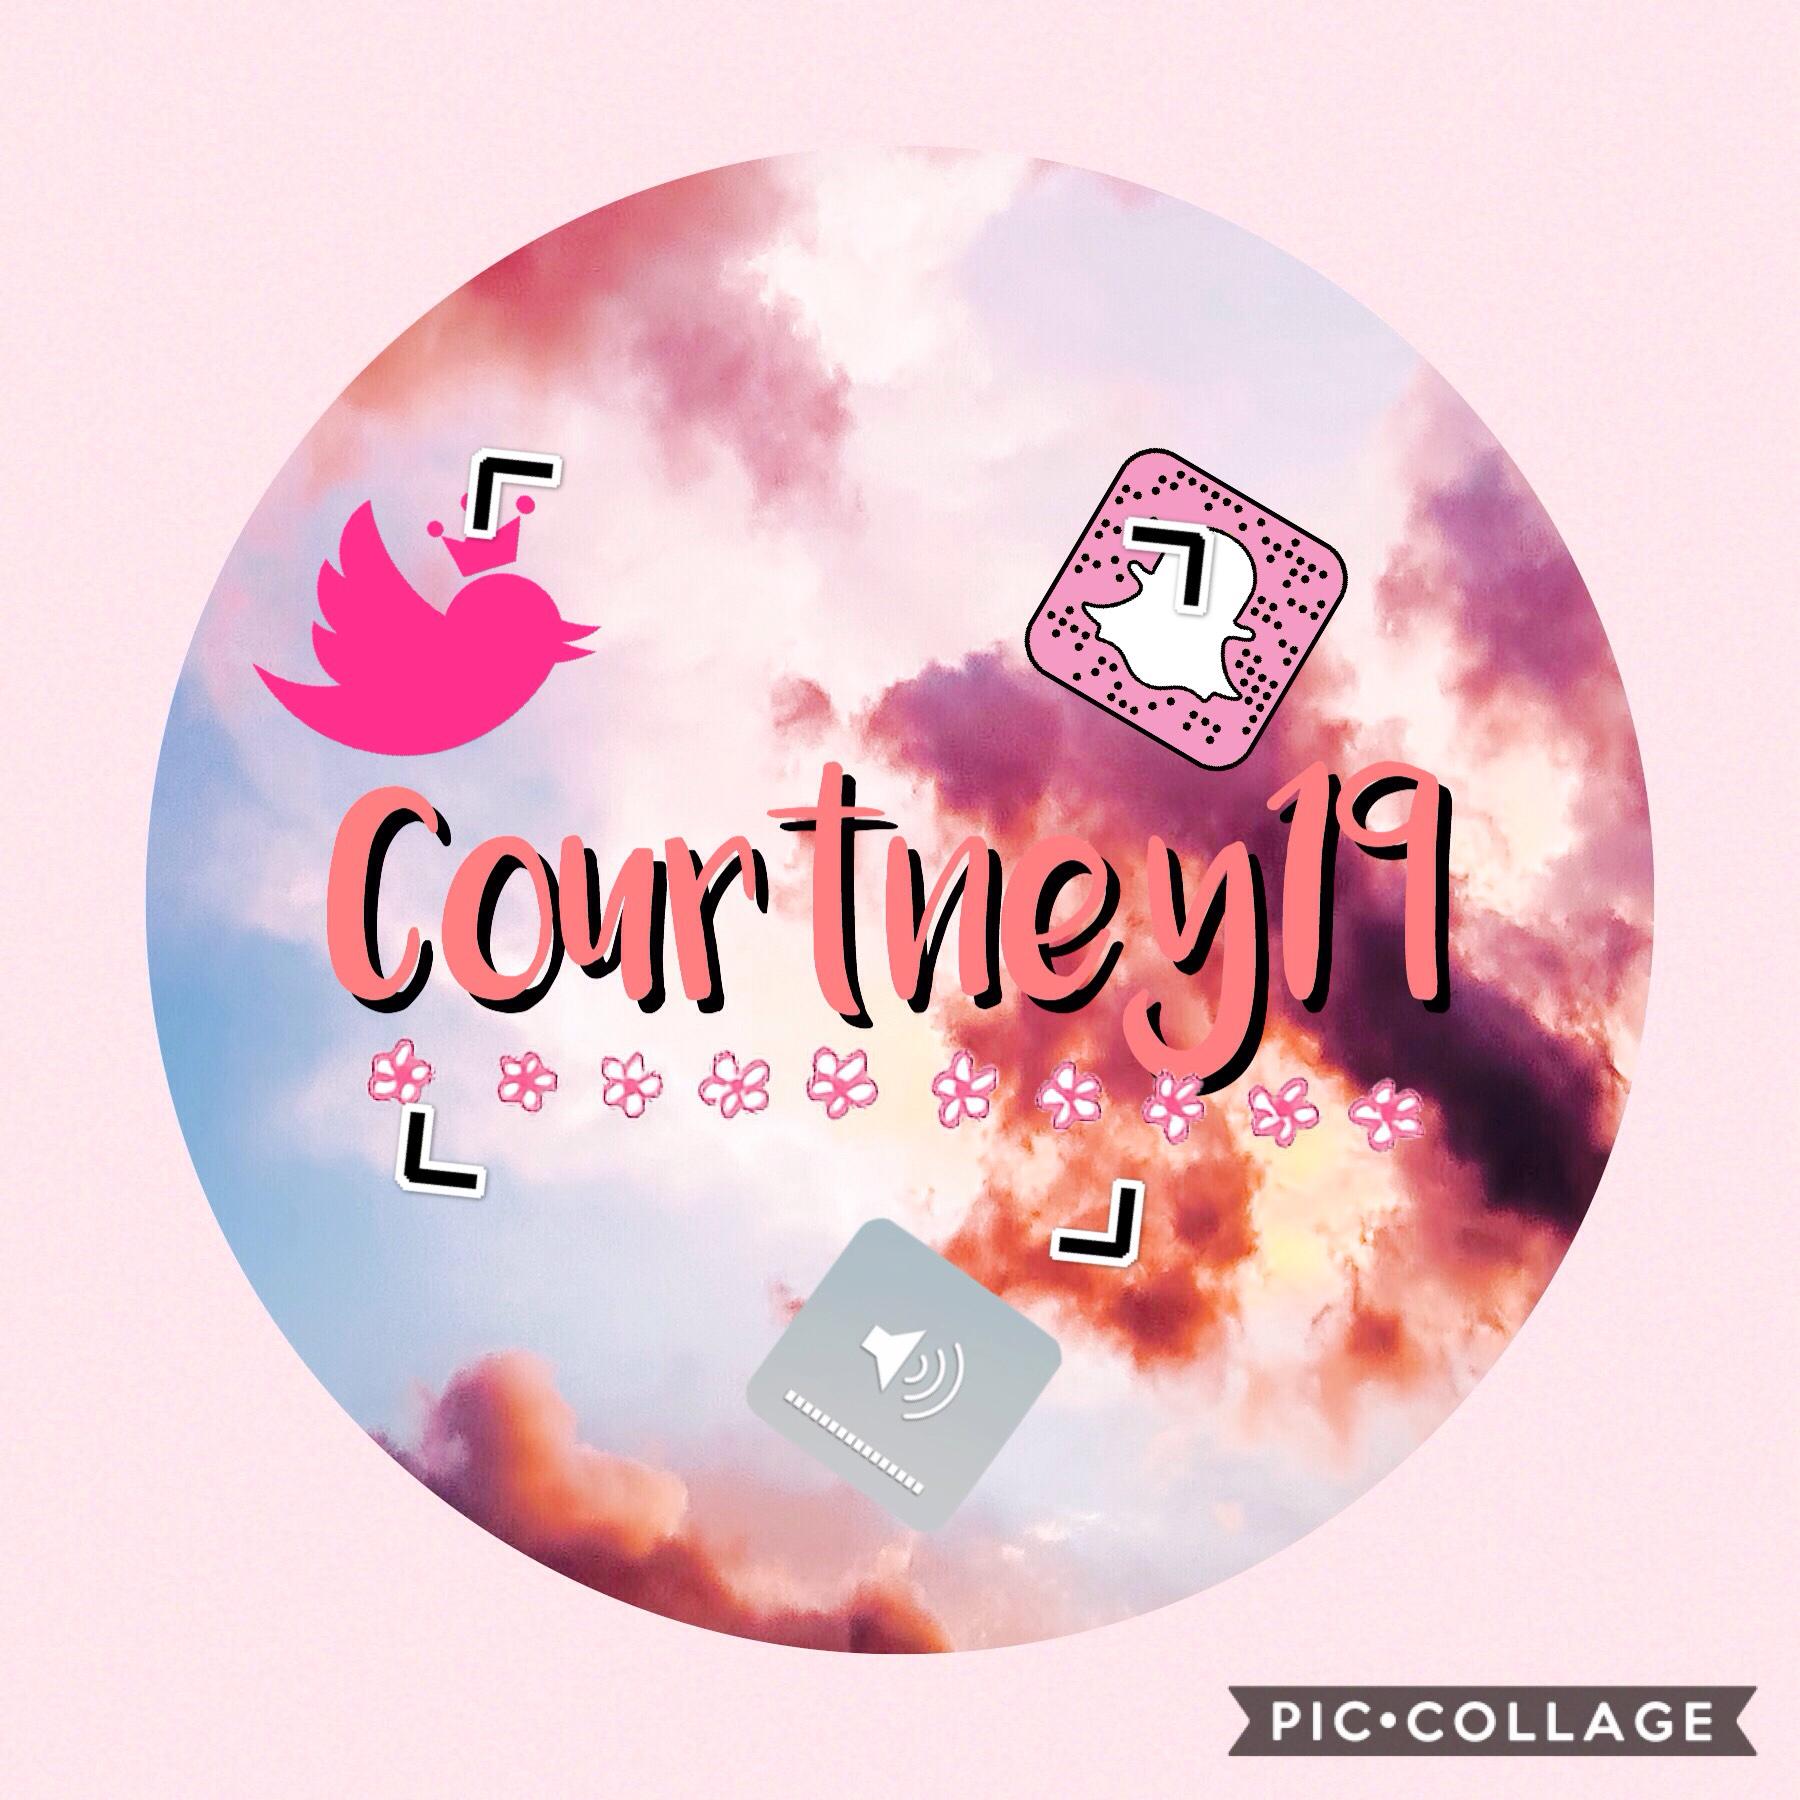               Made for Courtney19 only!!